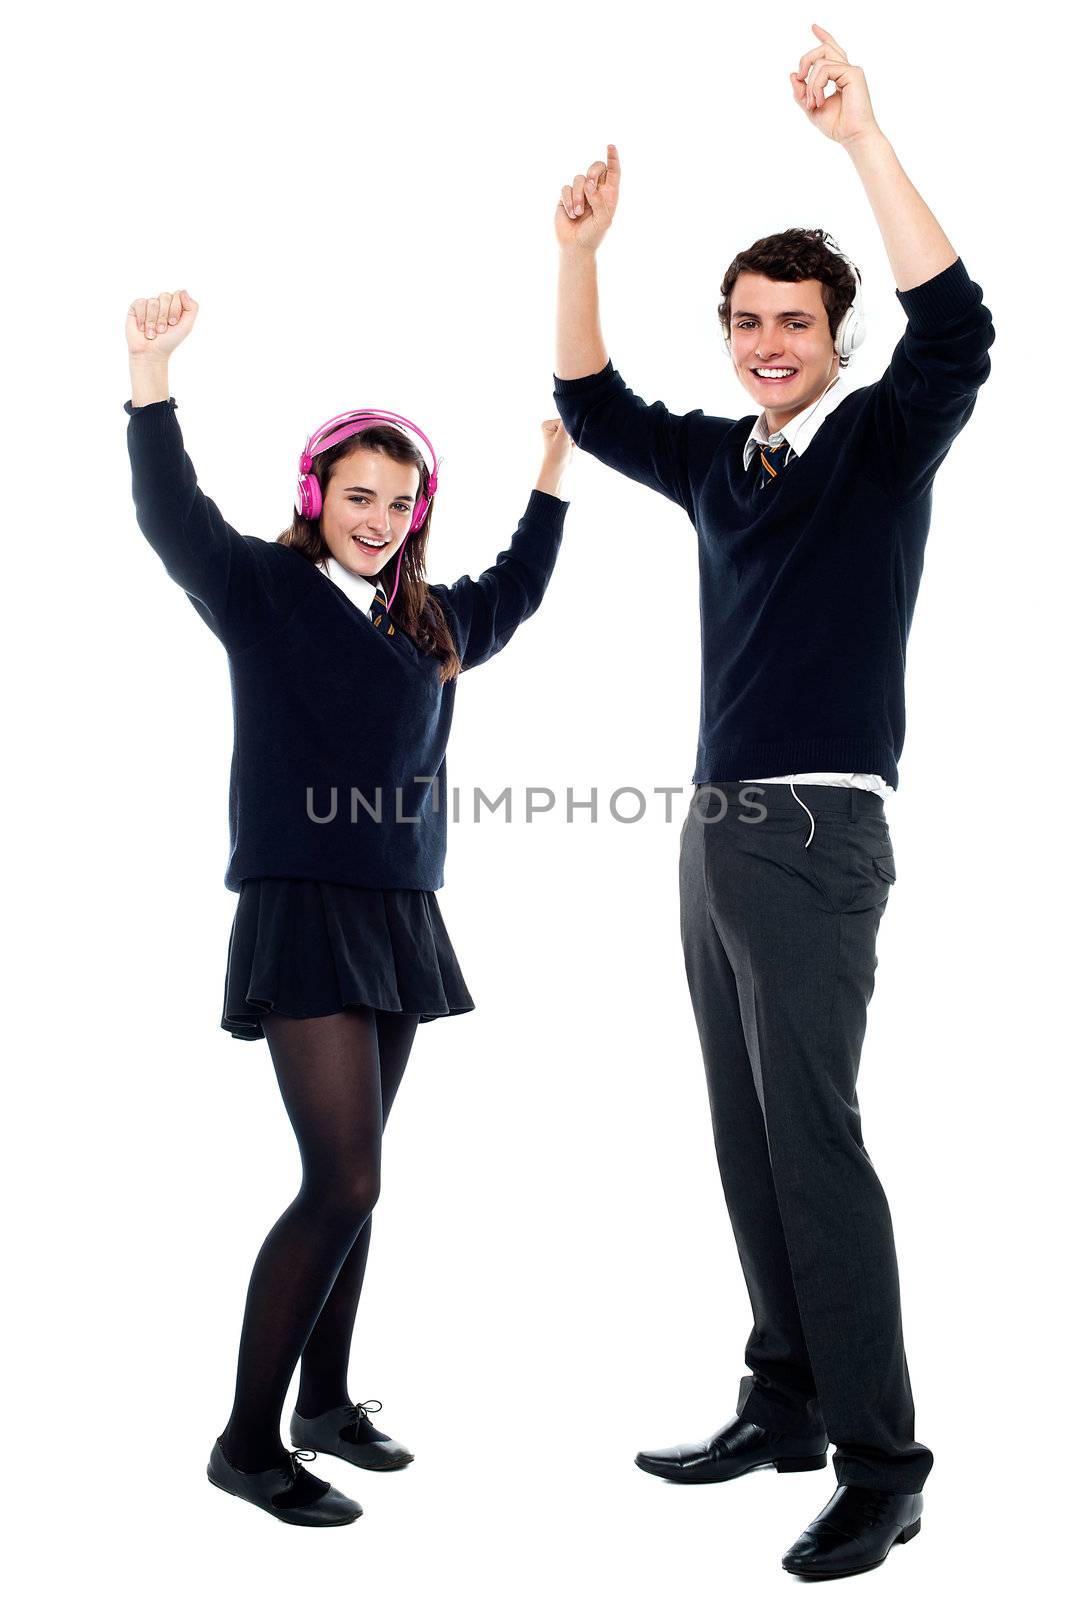 School going teenagers dancing to the beat by stockyimages